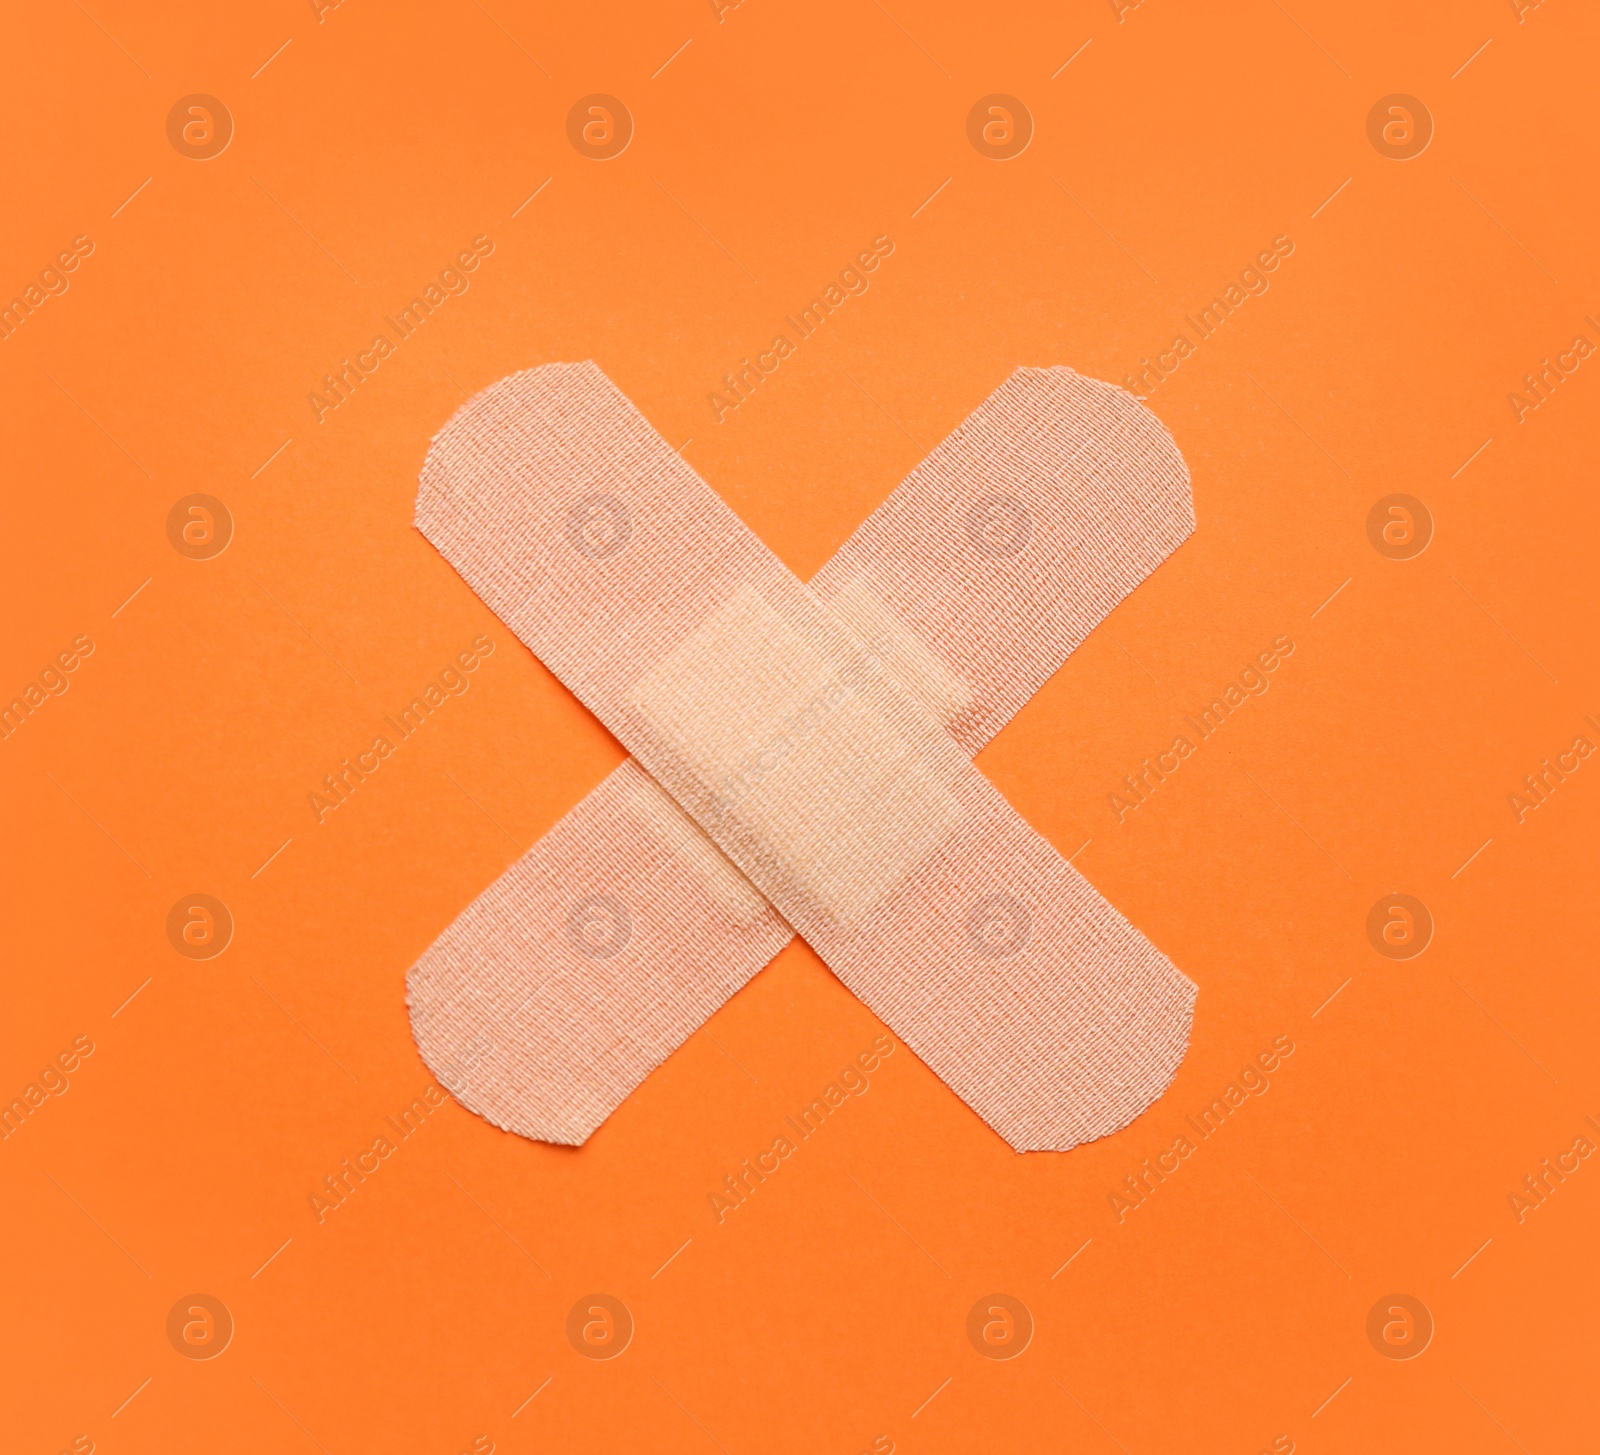 Photo of Sticking plasters on orange background, top view